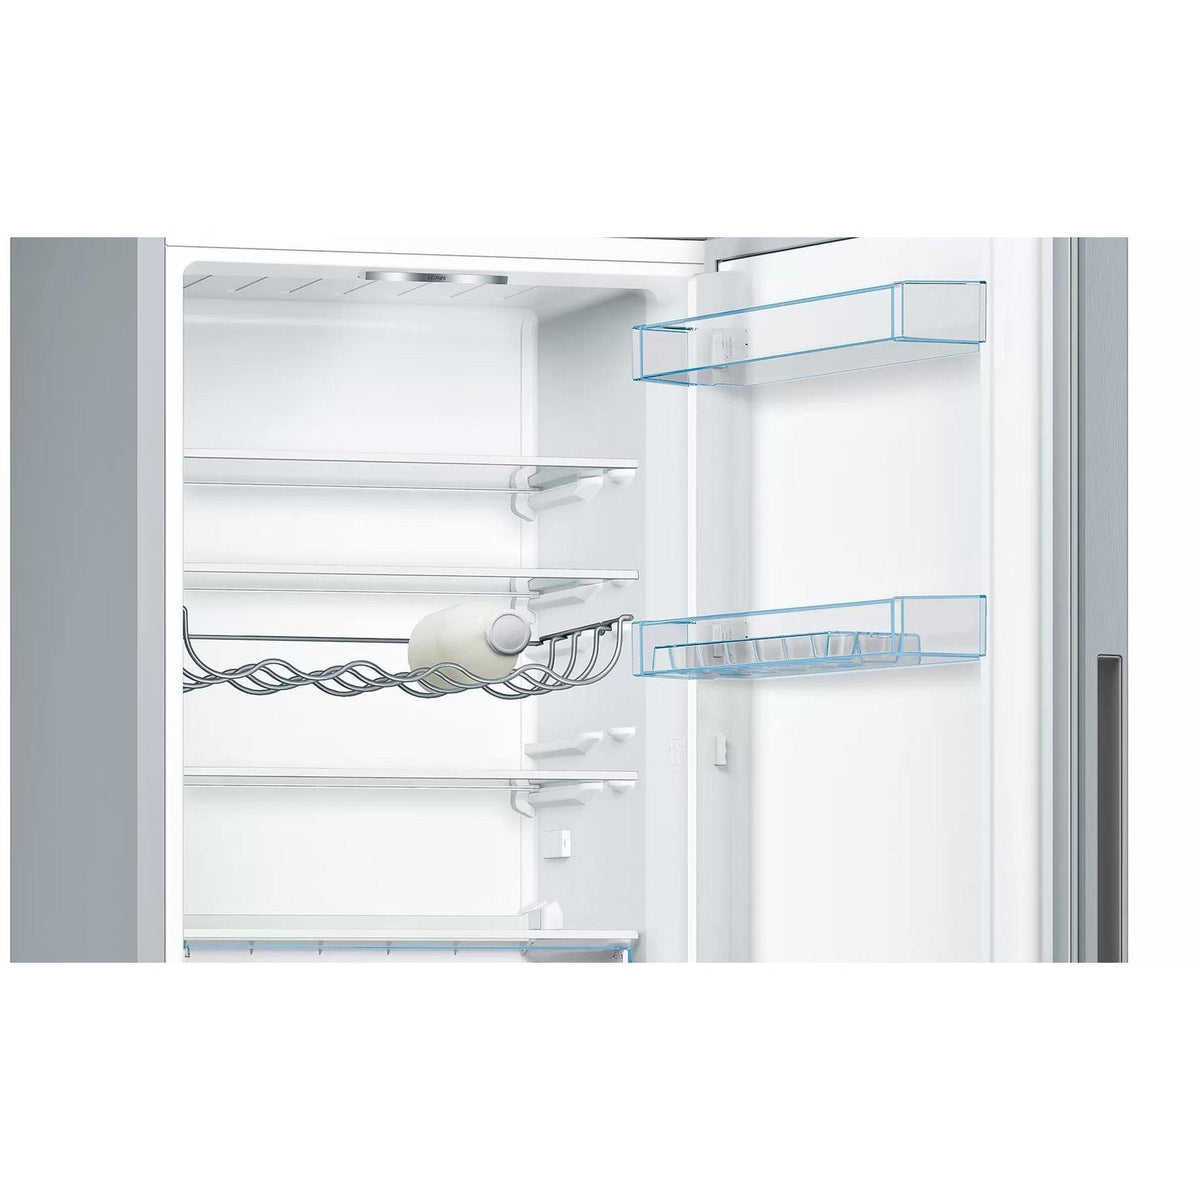 Bosch Serie 4 289L Freestanding Fridge Freezer - Stainless Steel | KGV33VLEAG from DID Electrical - guaranteed Irish, guaranteed quality service. (6977694761148)